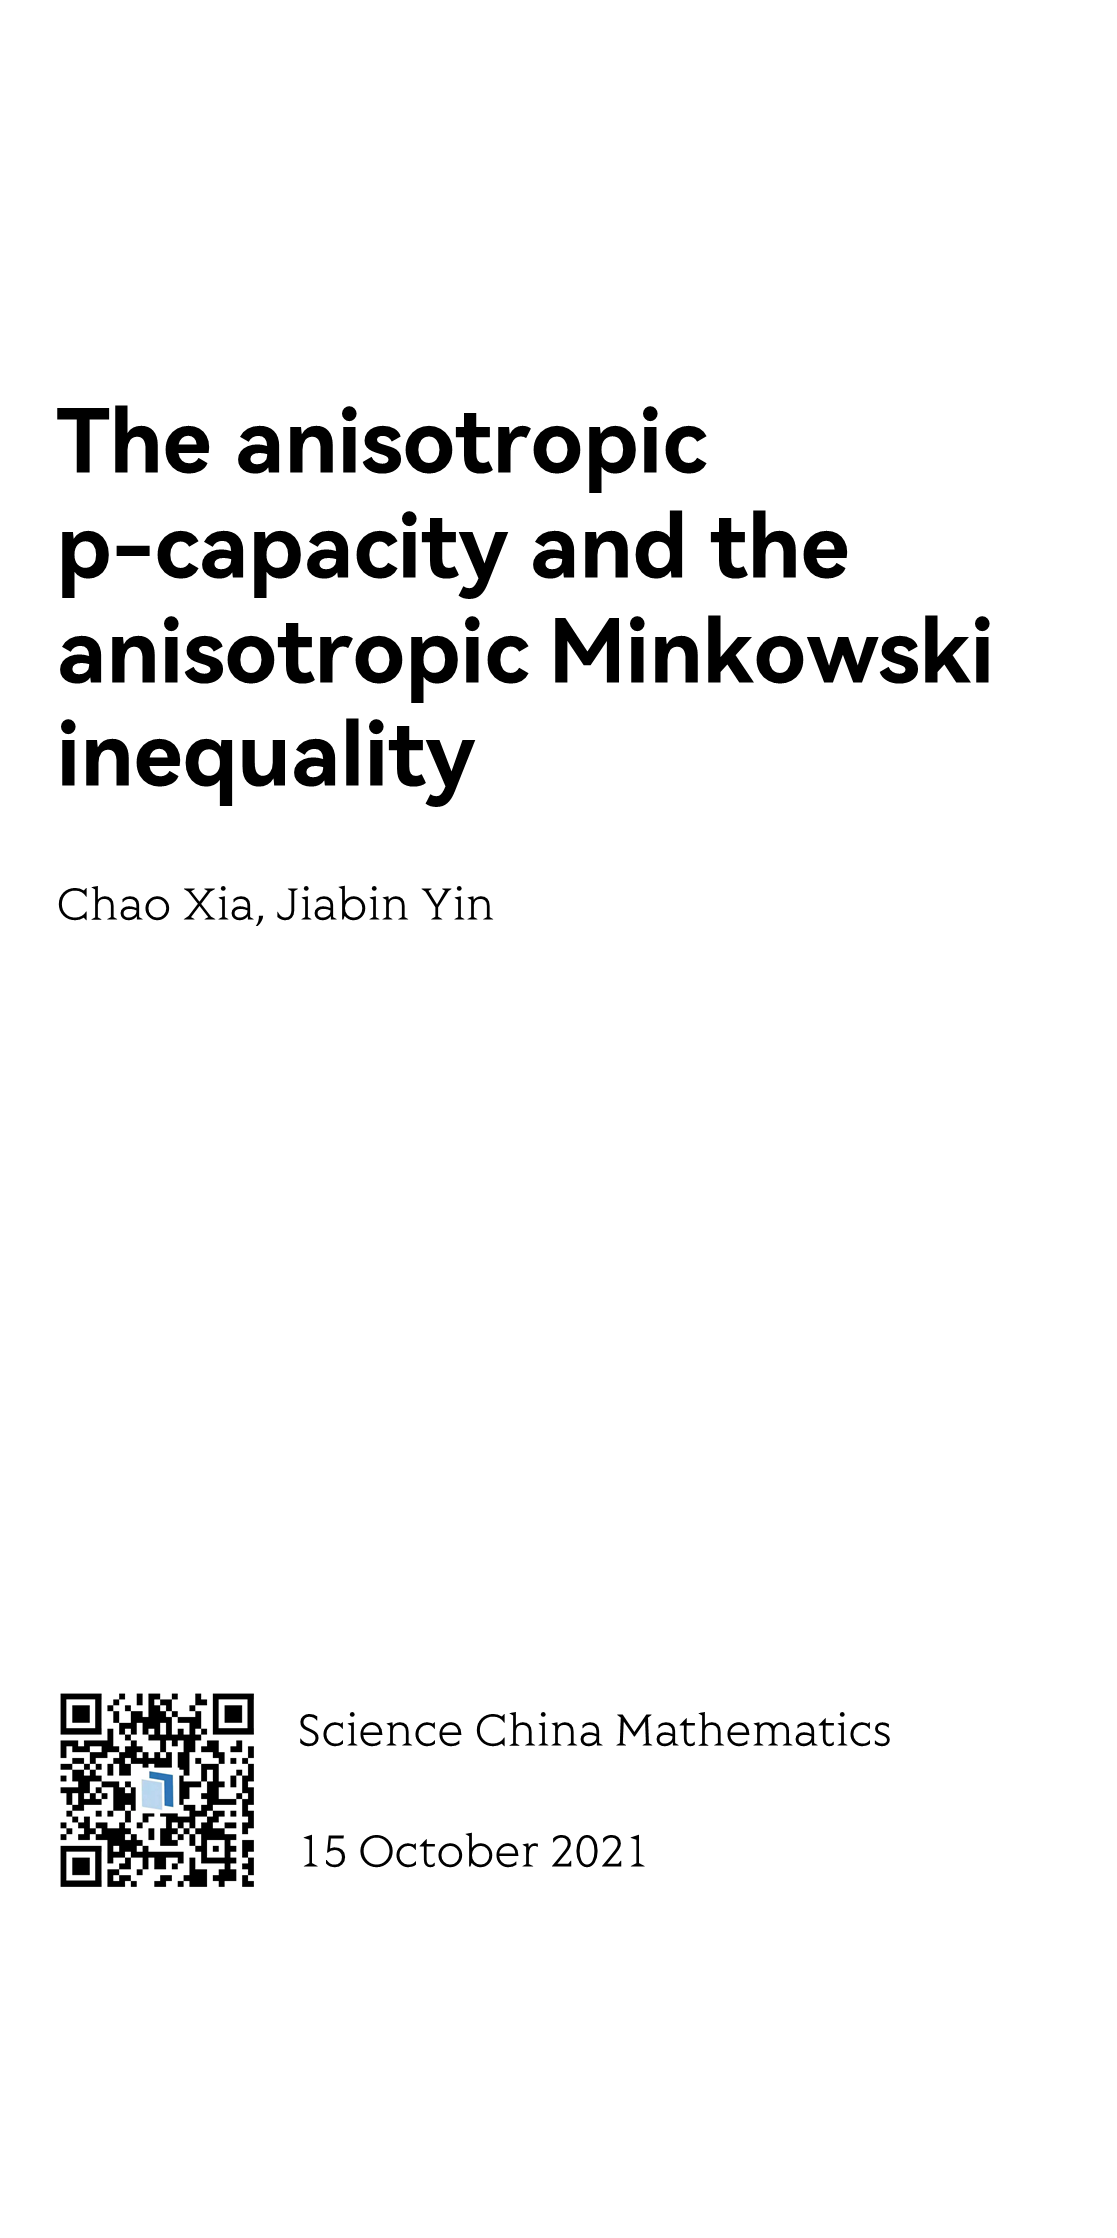 The anisotropic p-capacity and the anisotropic Minkowski inequality_1